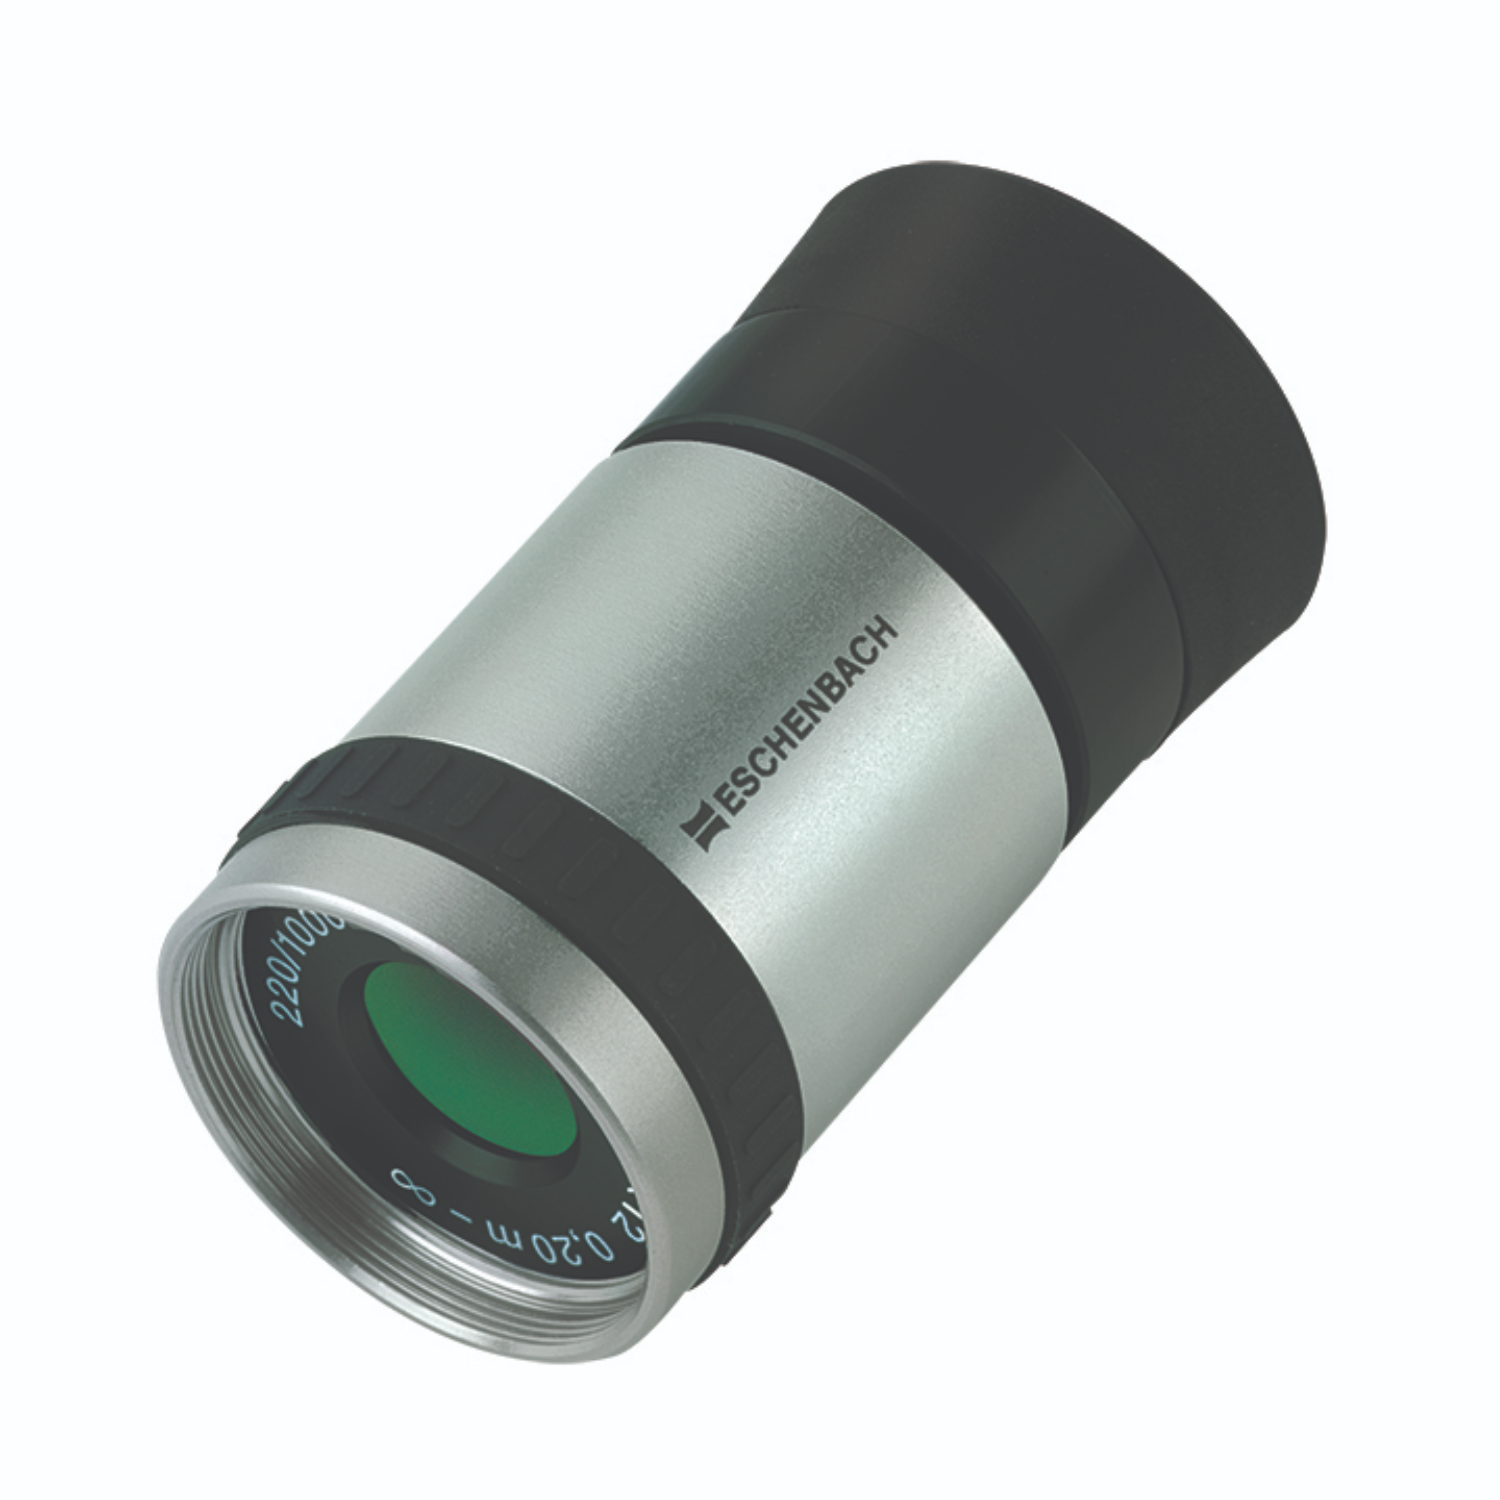 Image of the Focusable Keplerian Monocular 4.2x12mm telescope from Eschenbach.